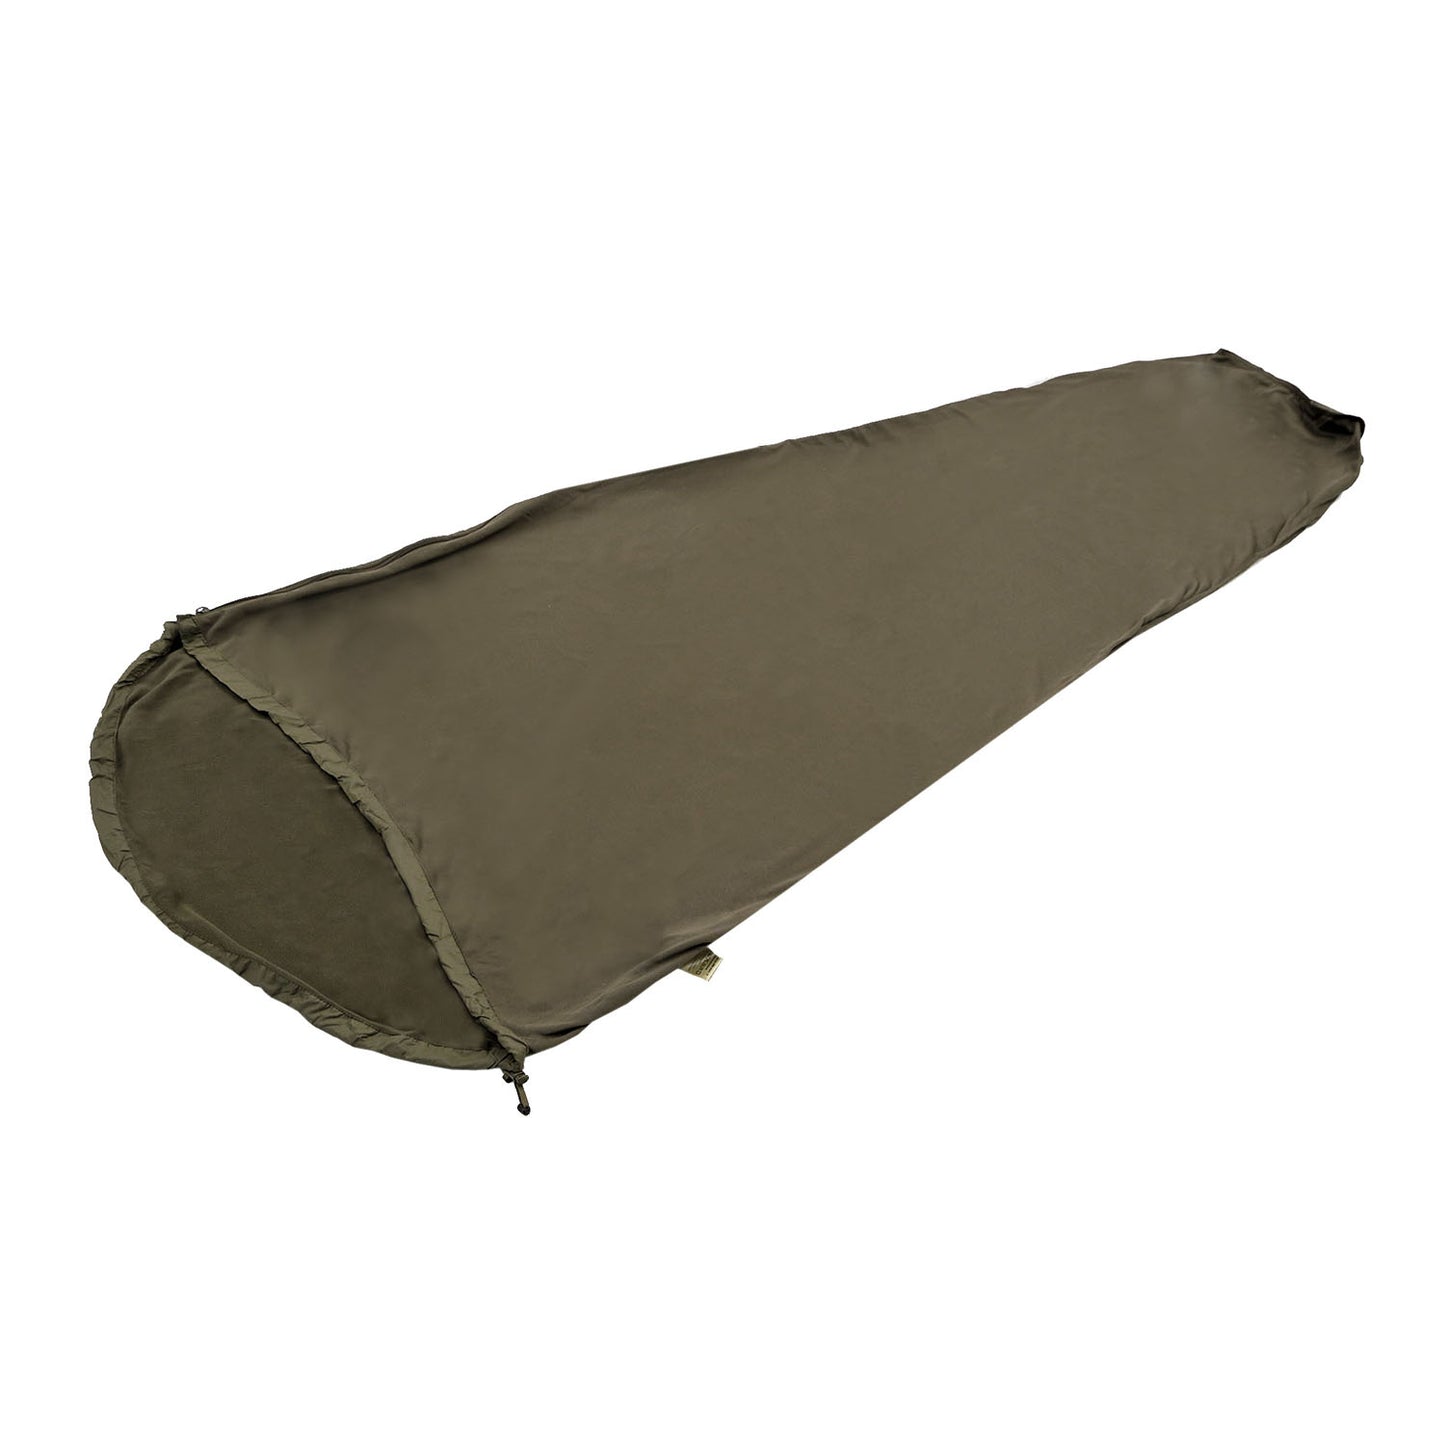 Carinthia Grizzly, olive